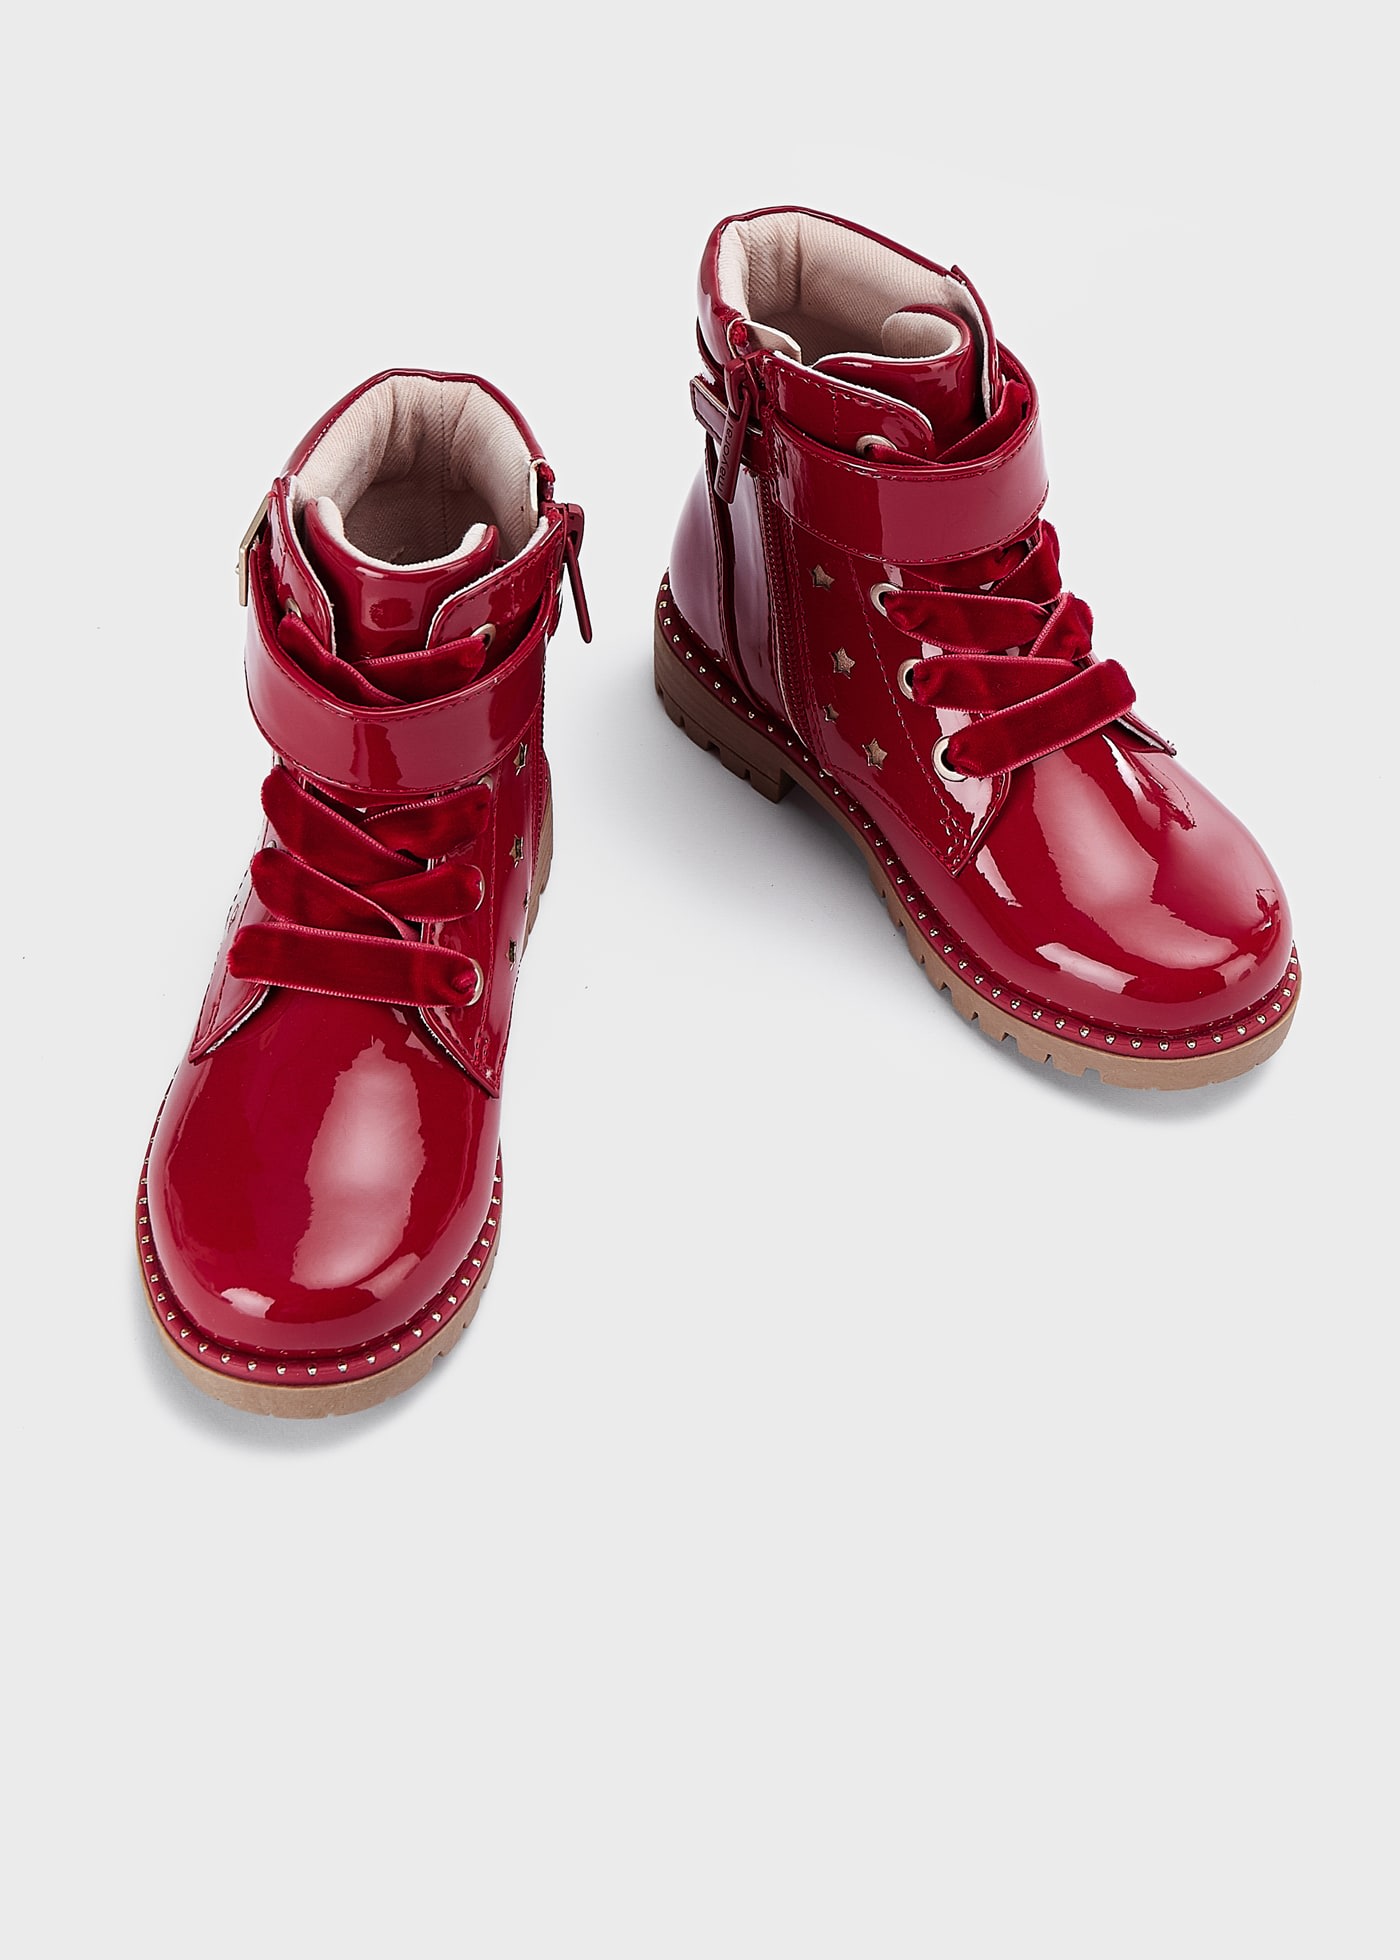 Biker boots patent leather girl